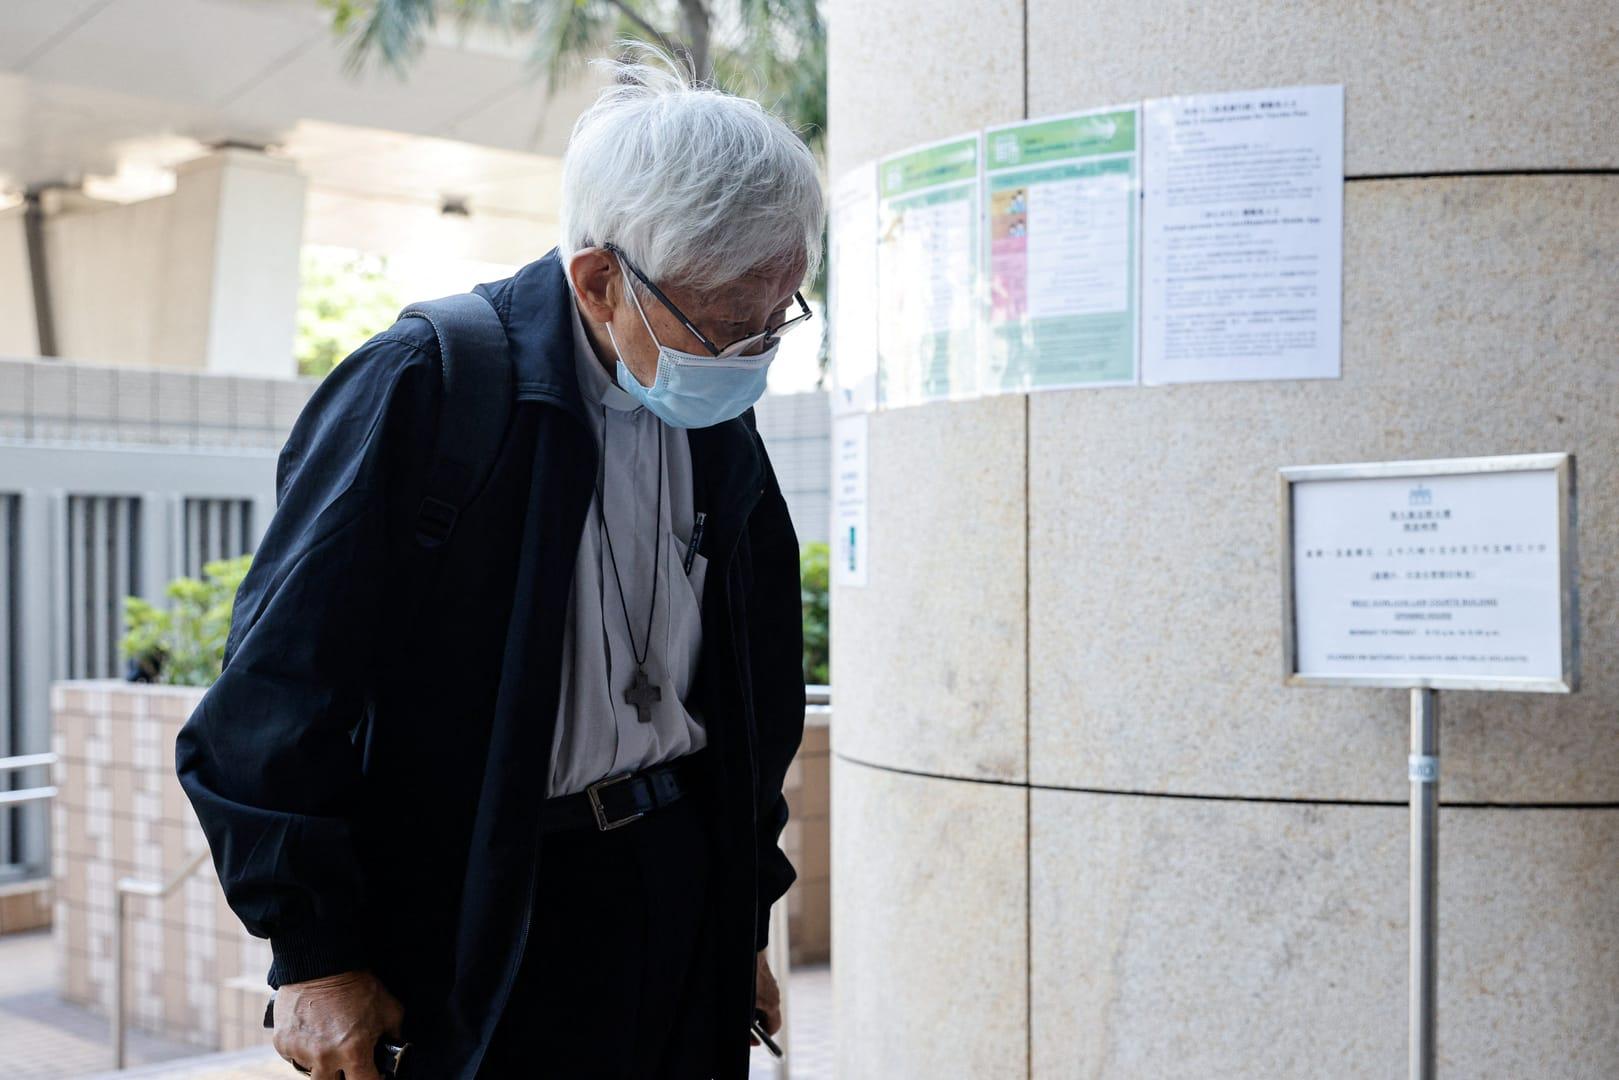 Hong Kong cardinal, others, return to court; defense presents case Oct. 31